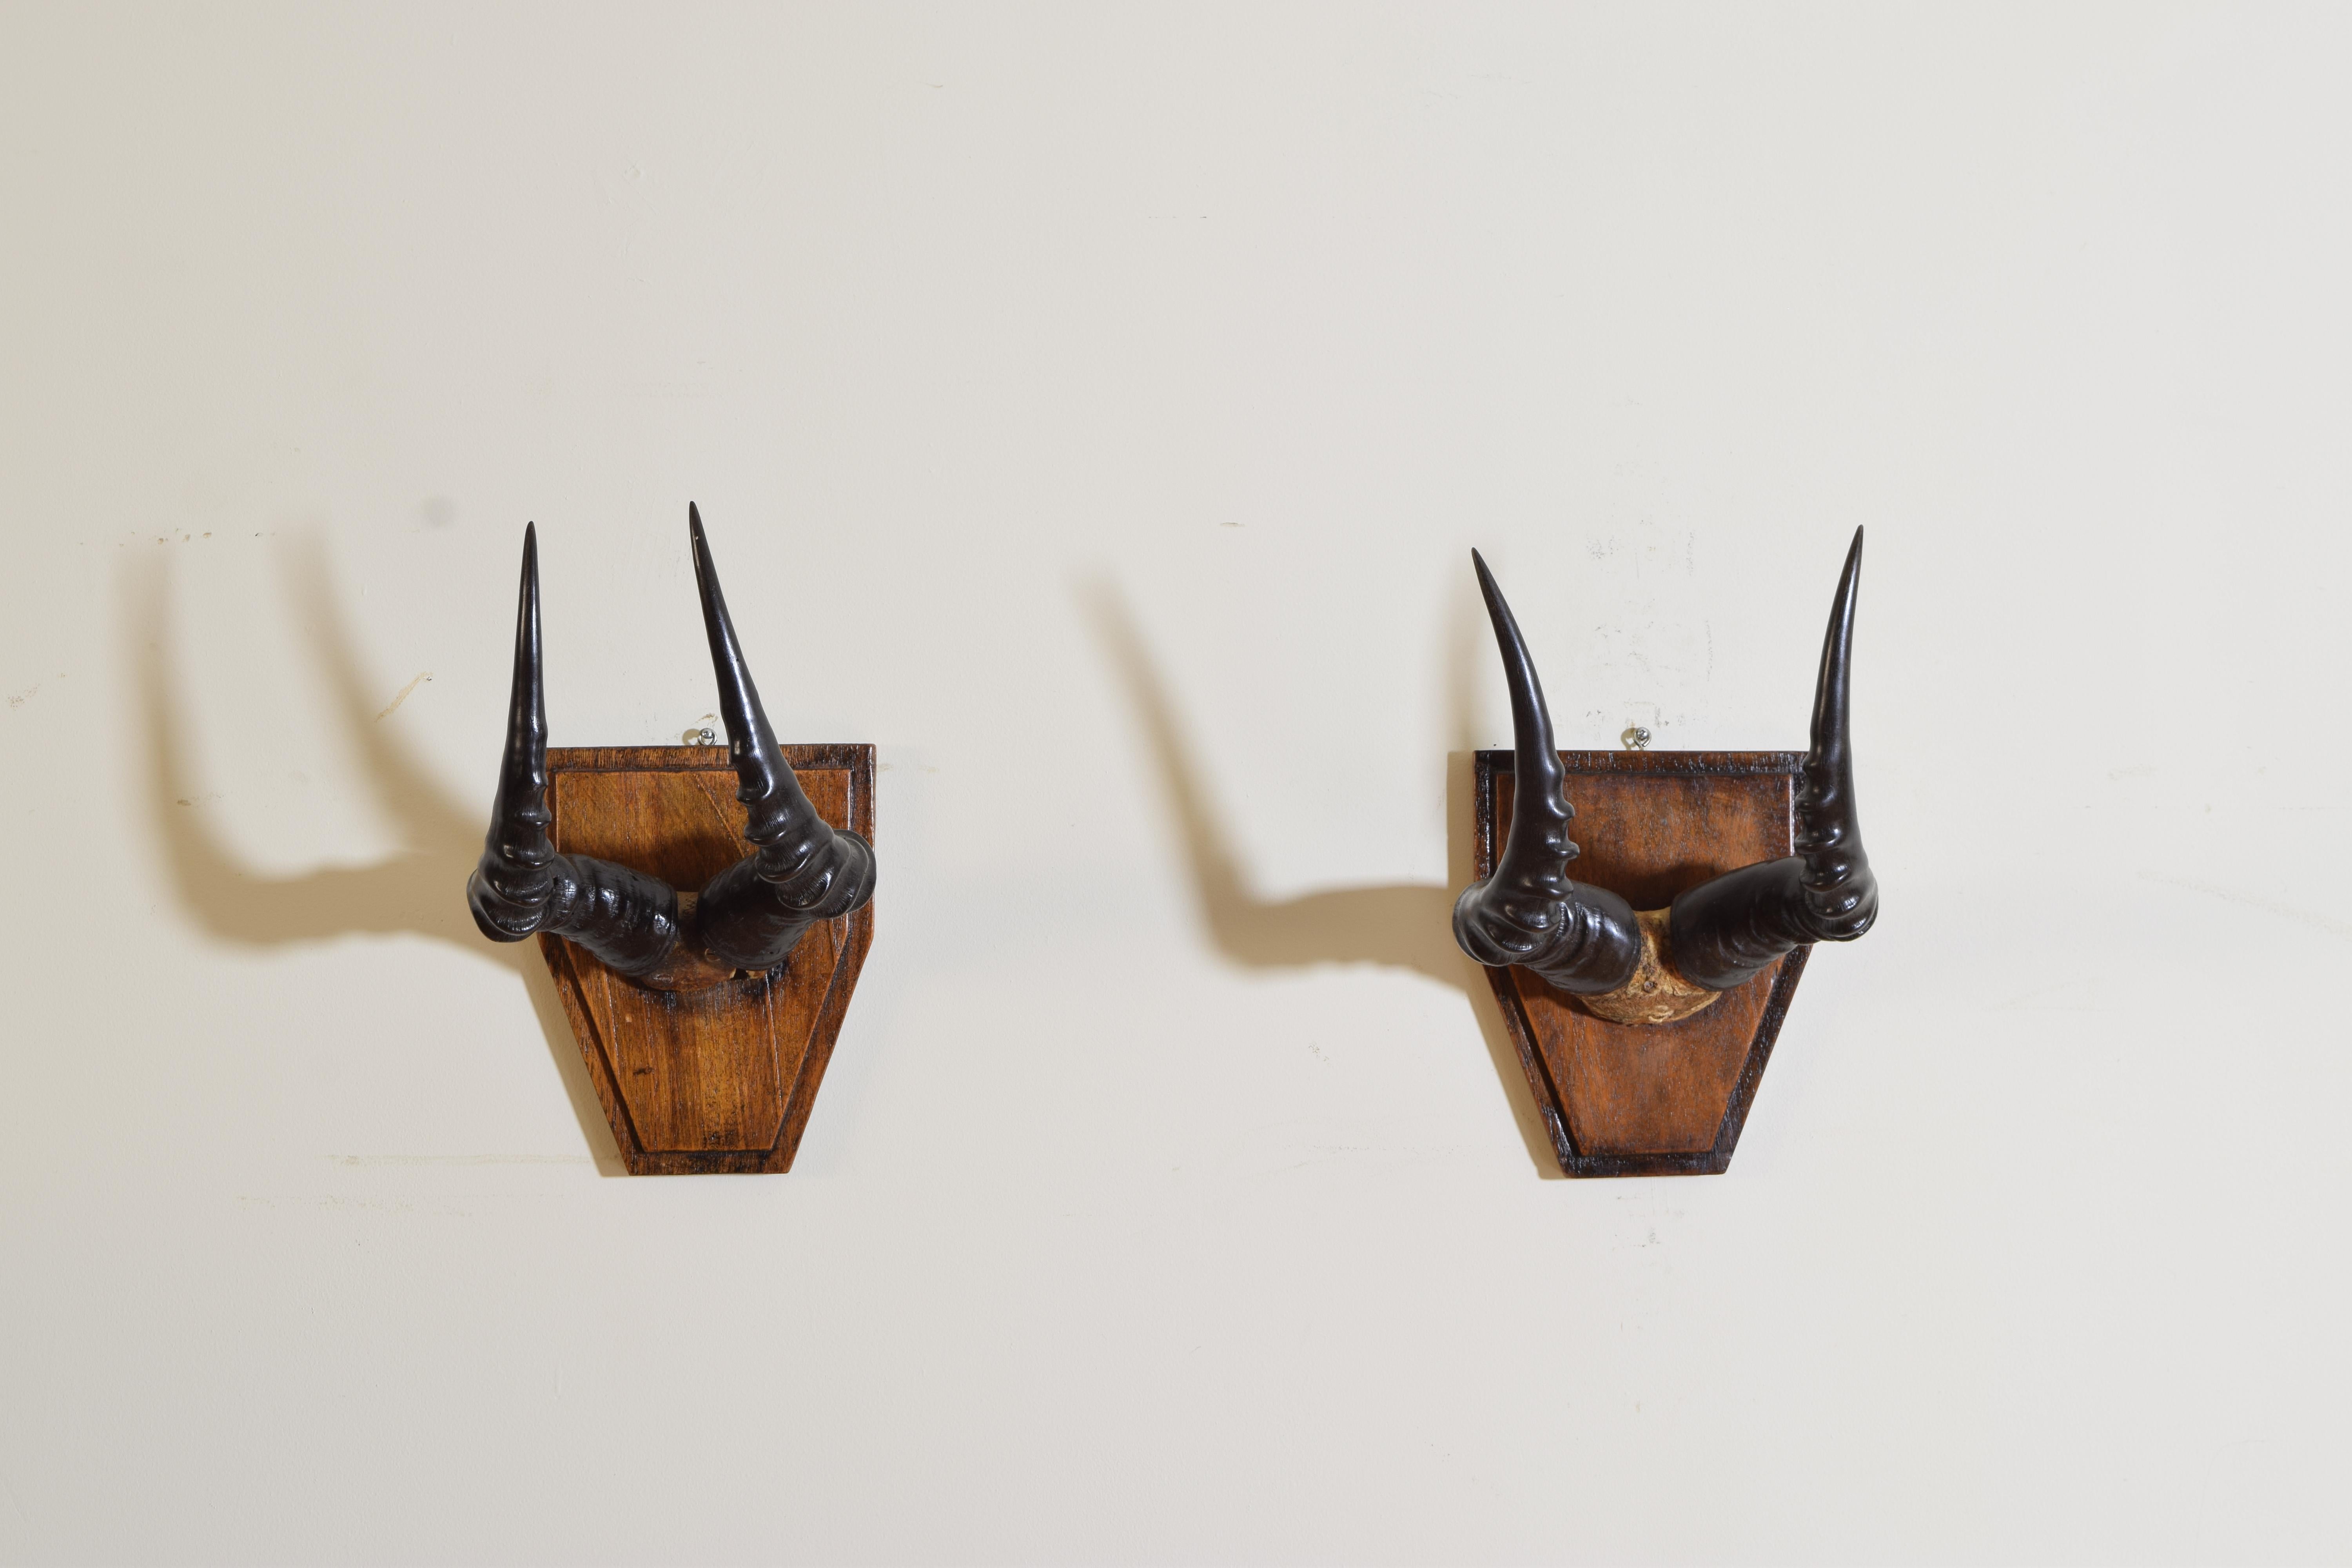 Each partical skull mount and horns of Topi mounted on pyramidal shaped backplates.